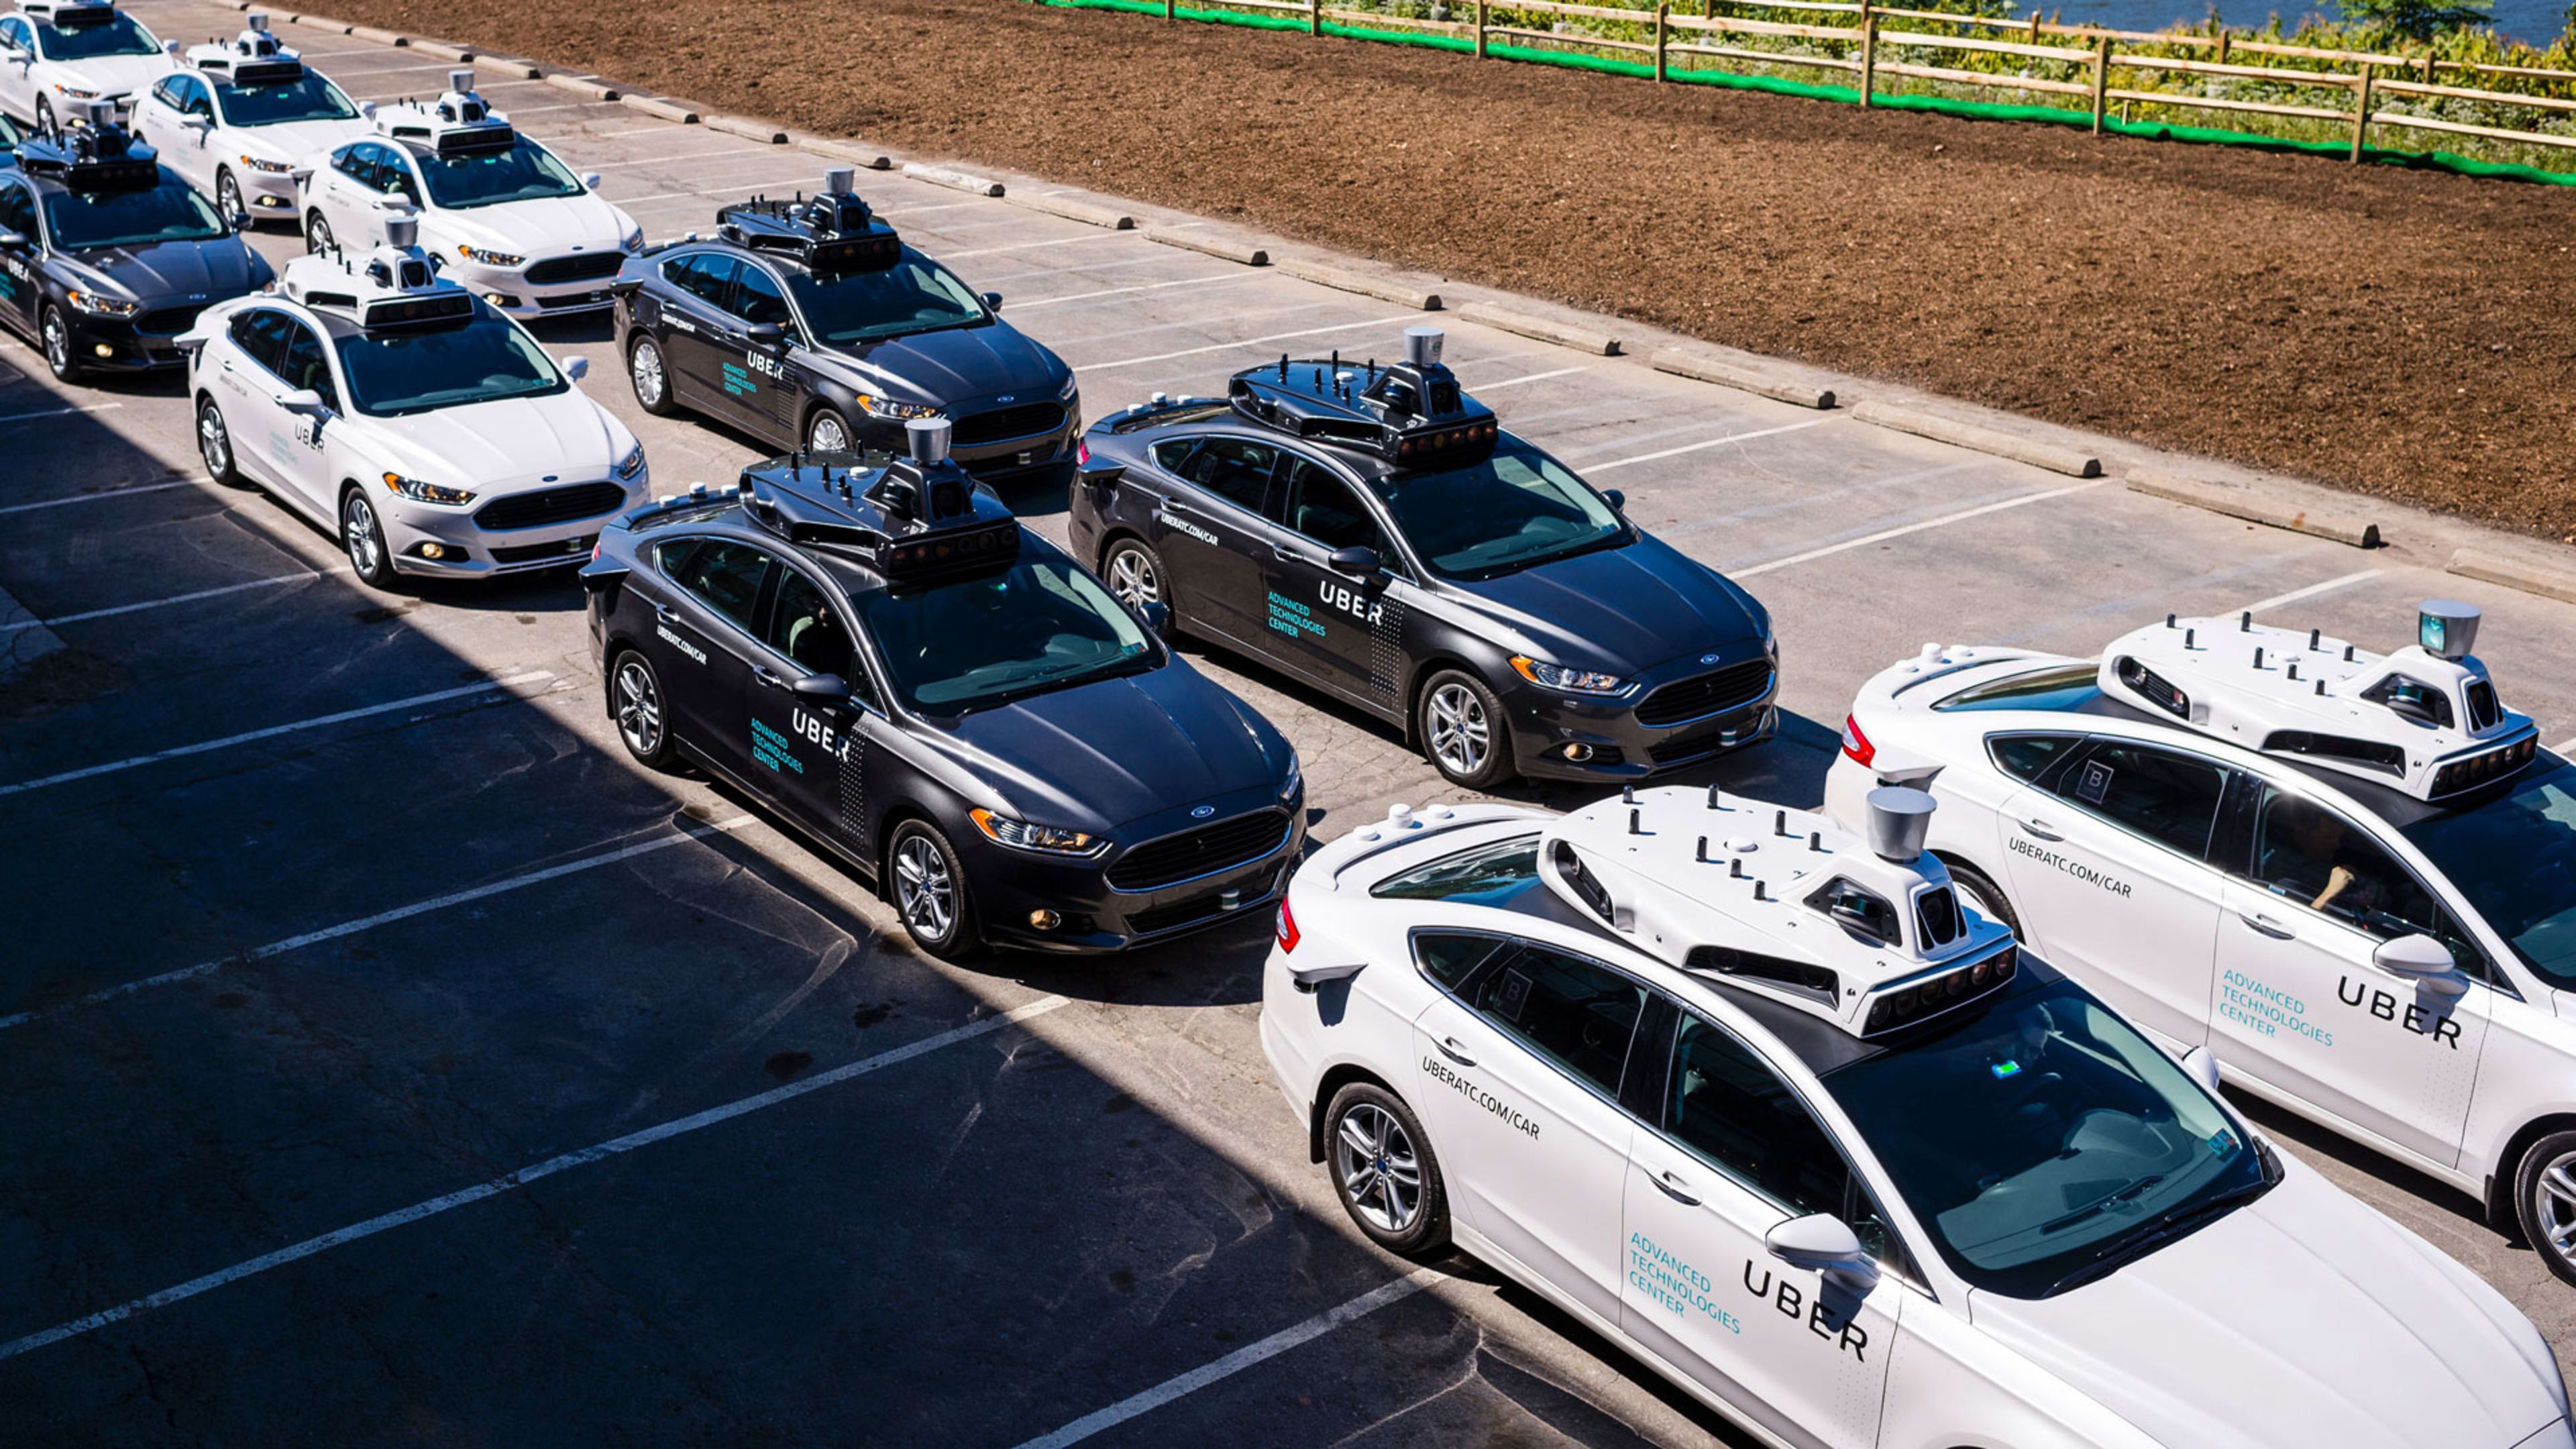 For years, automakers wildly overpromised on self-driving cars and electric vehicles—what now?